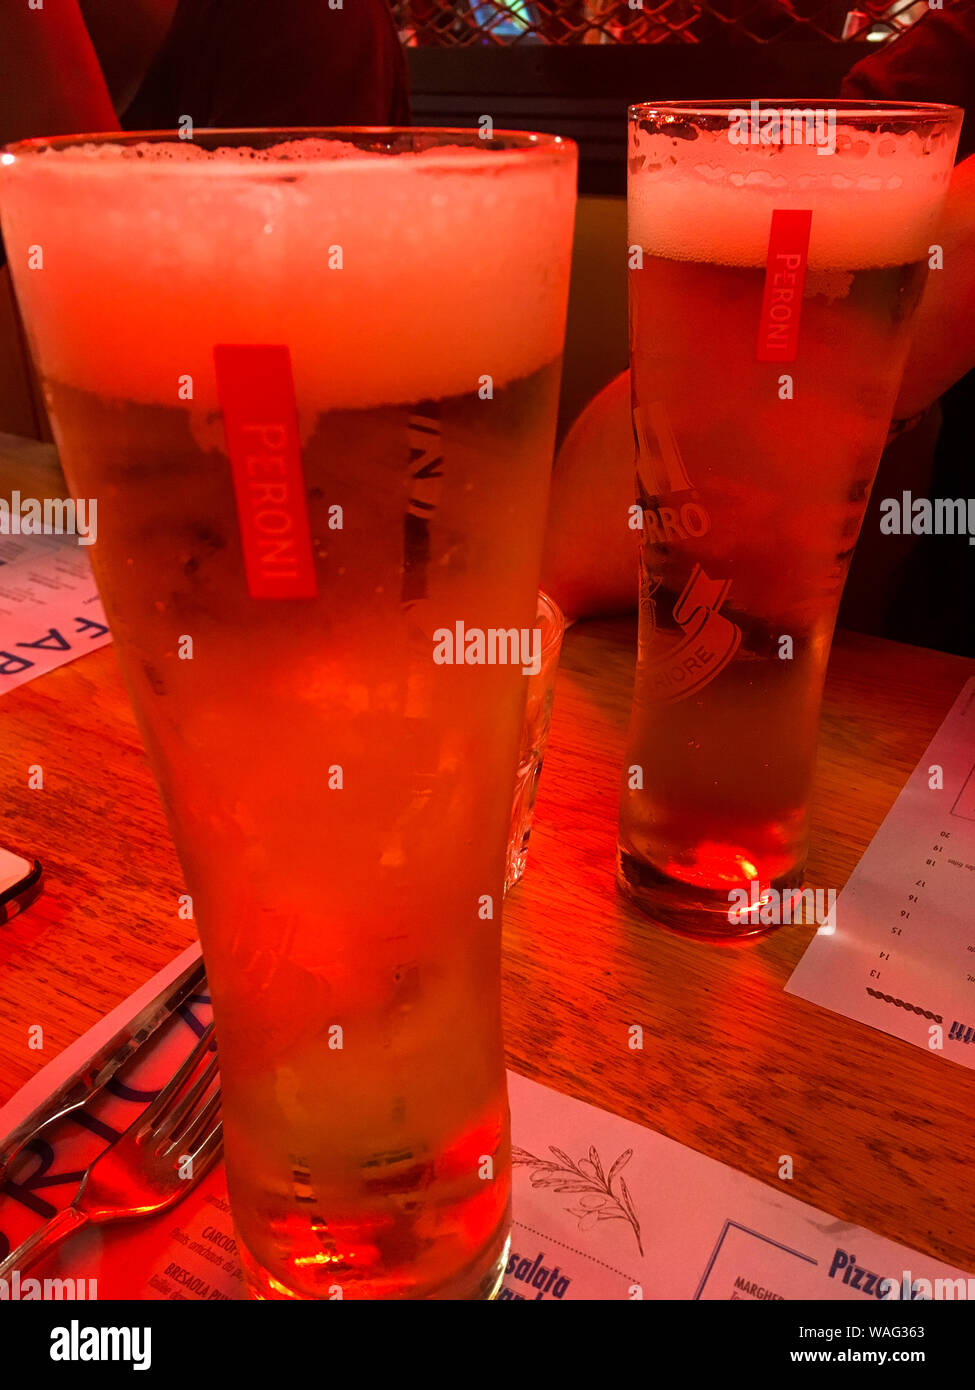 https://c8.alamy.com/comp/WAG363/glasses-of-peroni-beer-putted-on-a-table-in-a-red-lighted-bar-paris-ile-de-france-france-WAG363.jpg